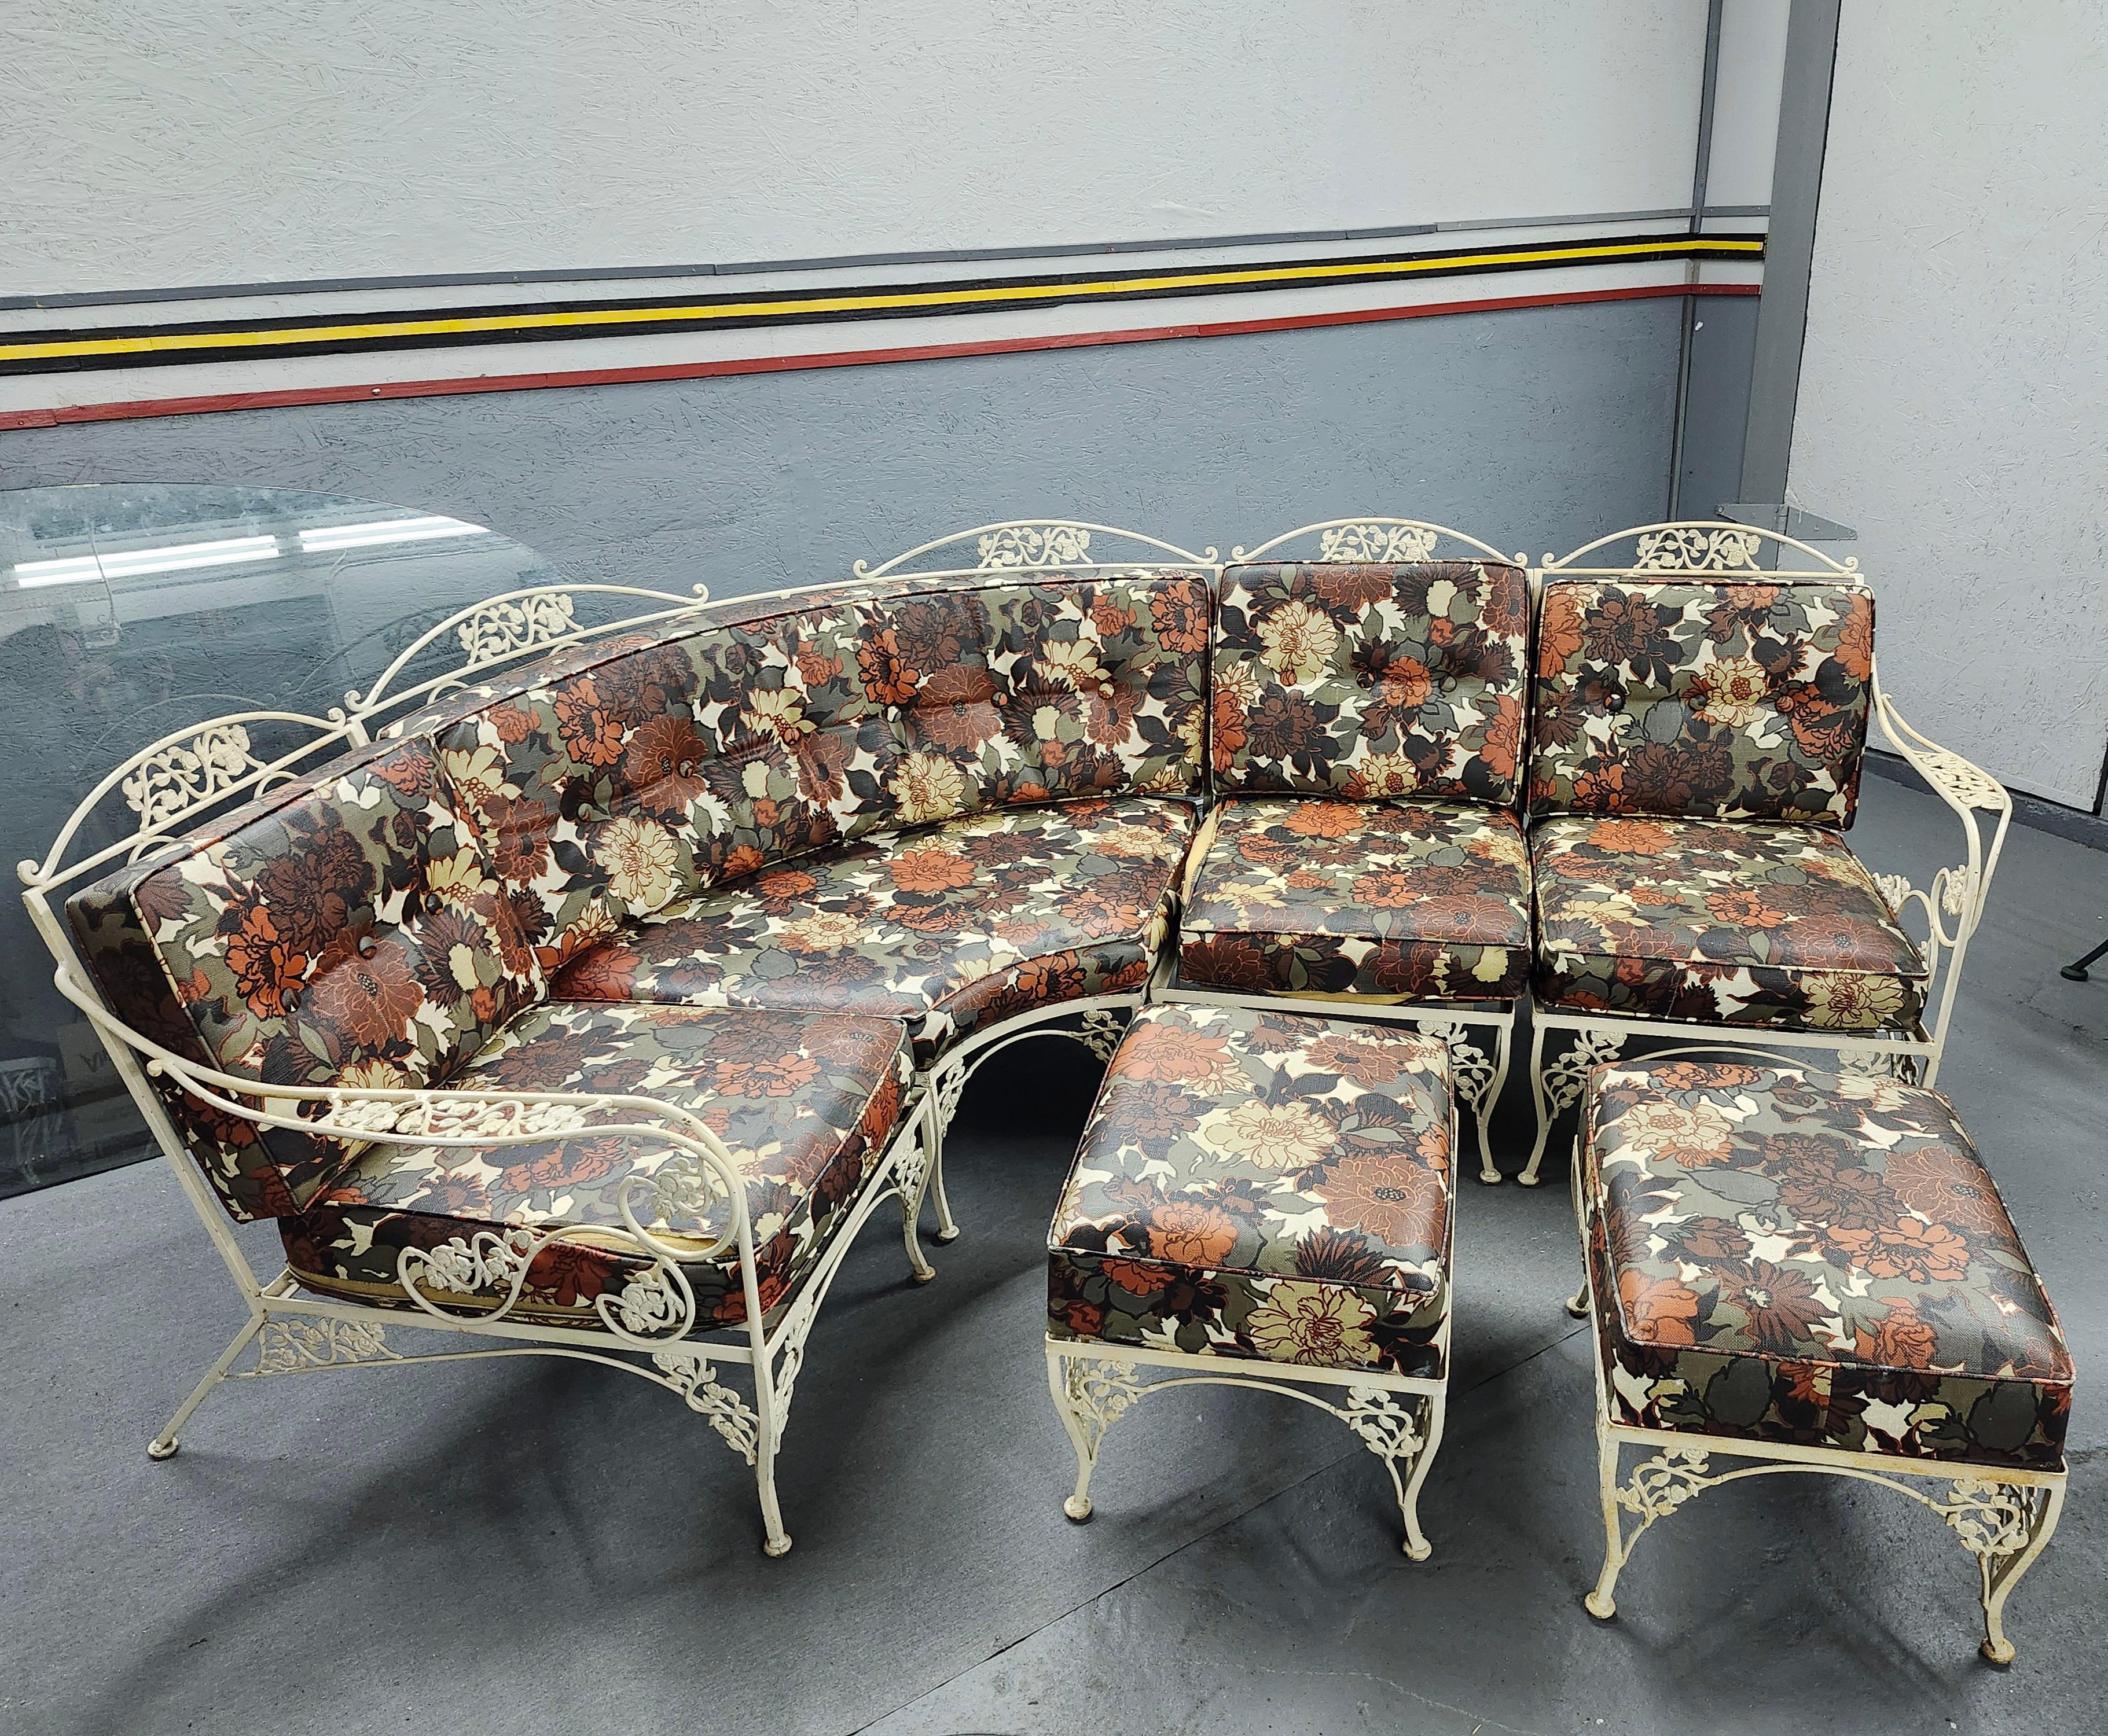 Vintage Wrought Irom Patio and Garden Seating In Good Condition For Sale In Cumberland, RI